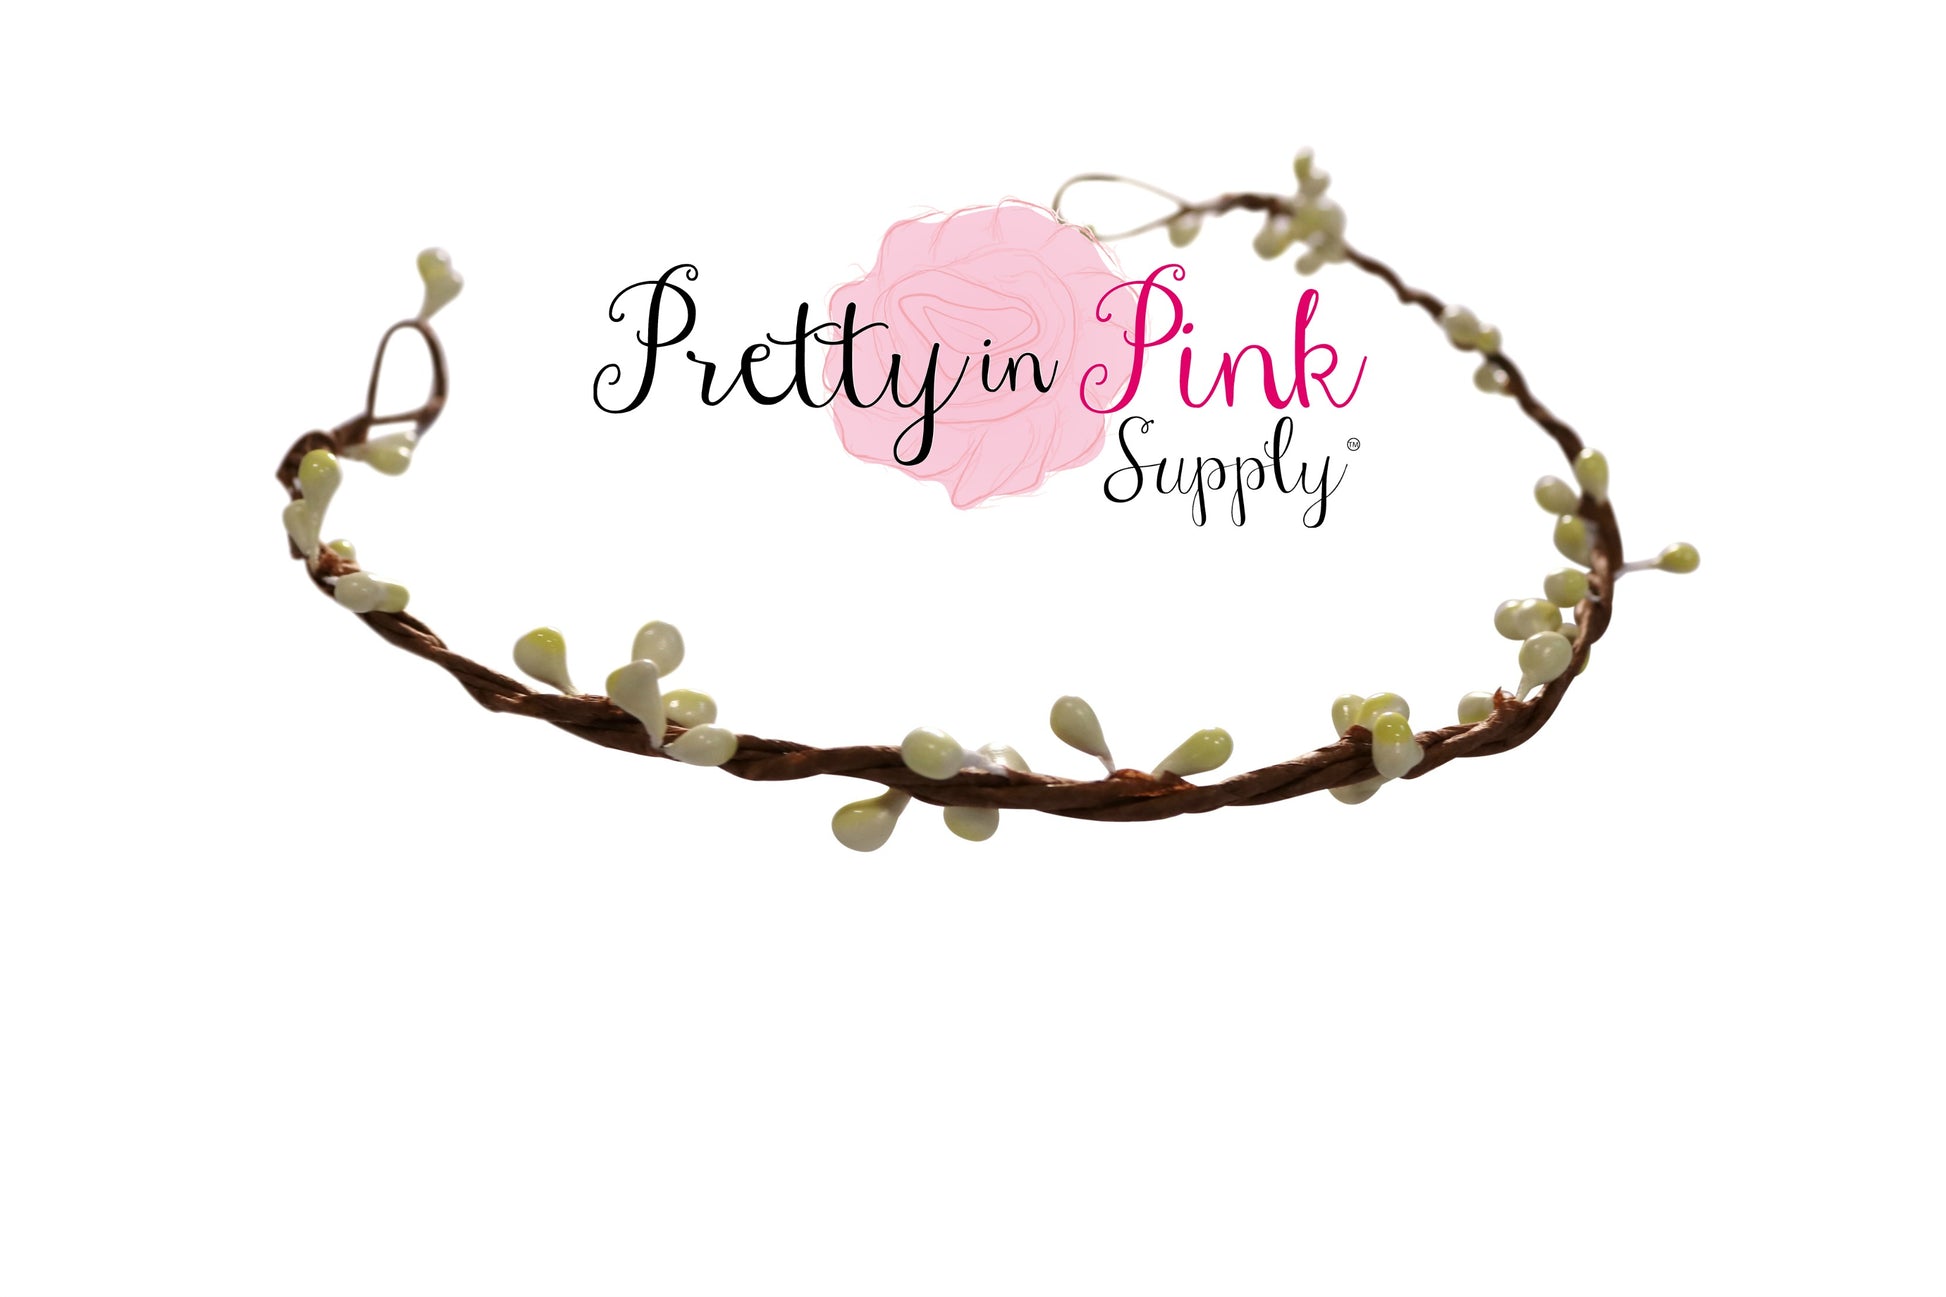 Ivory/Beaded Twig Crown W/Hints of Yellow - Pretty in Pink Supply